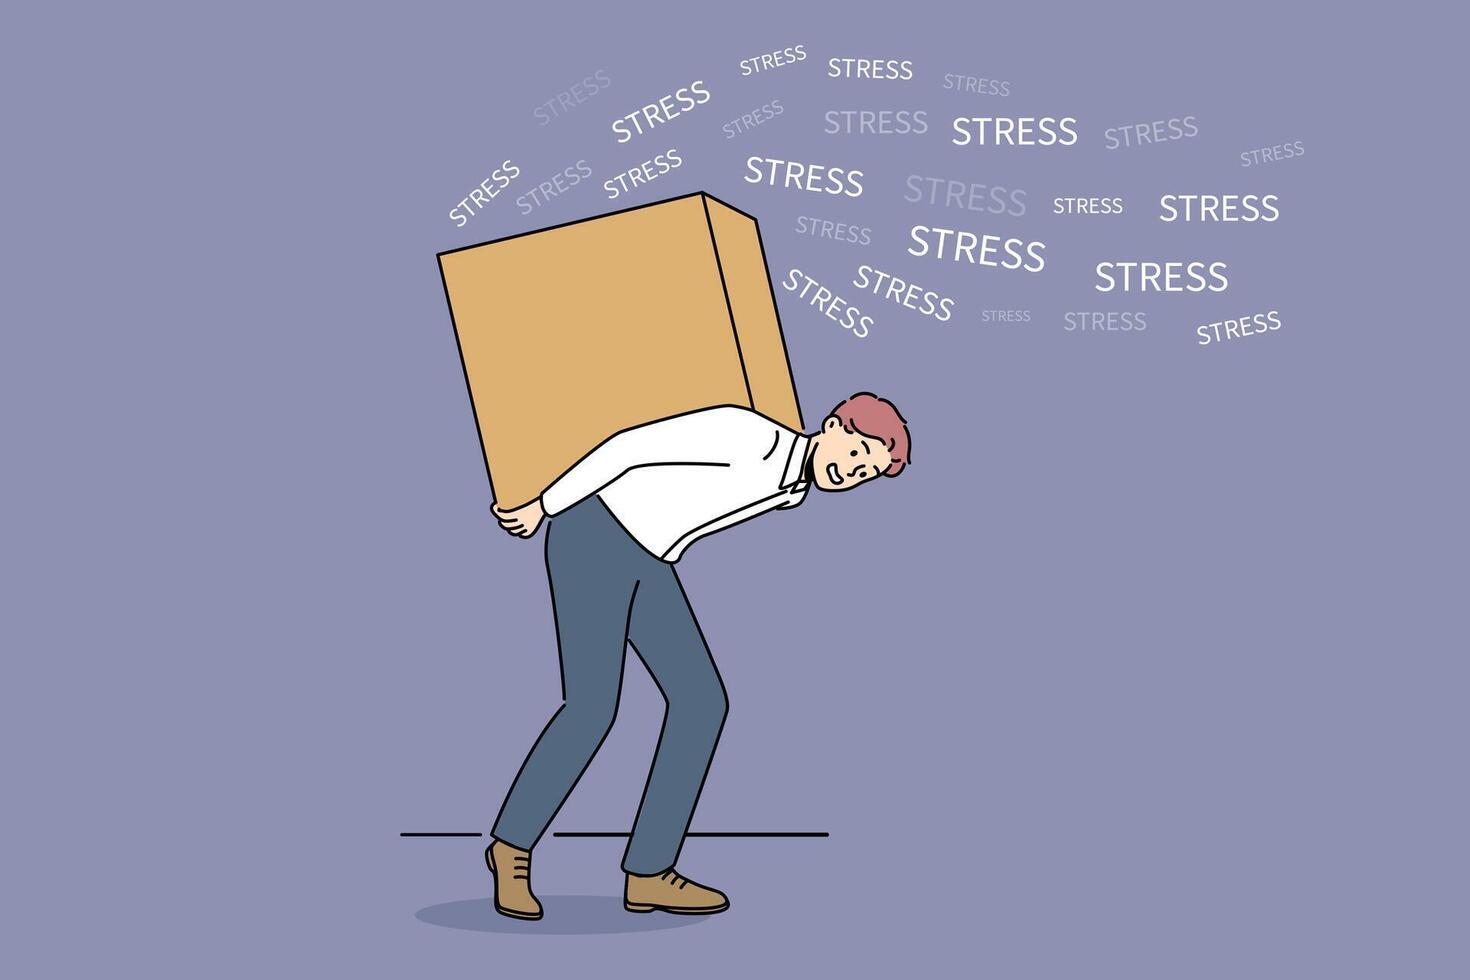 Man experiences stress due to pressure problems, carrying large box with load on back vector